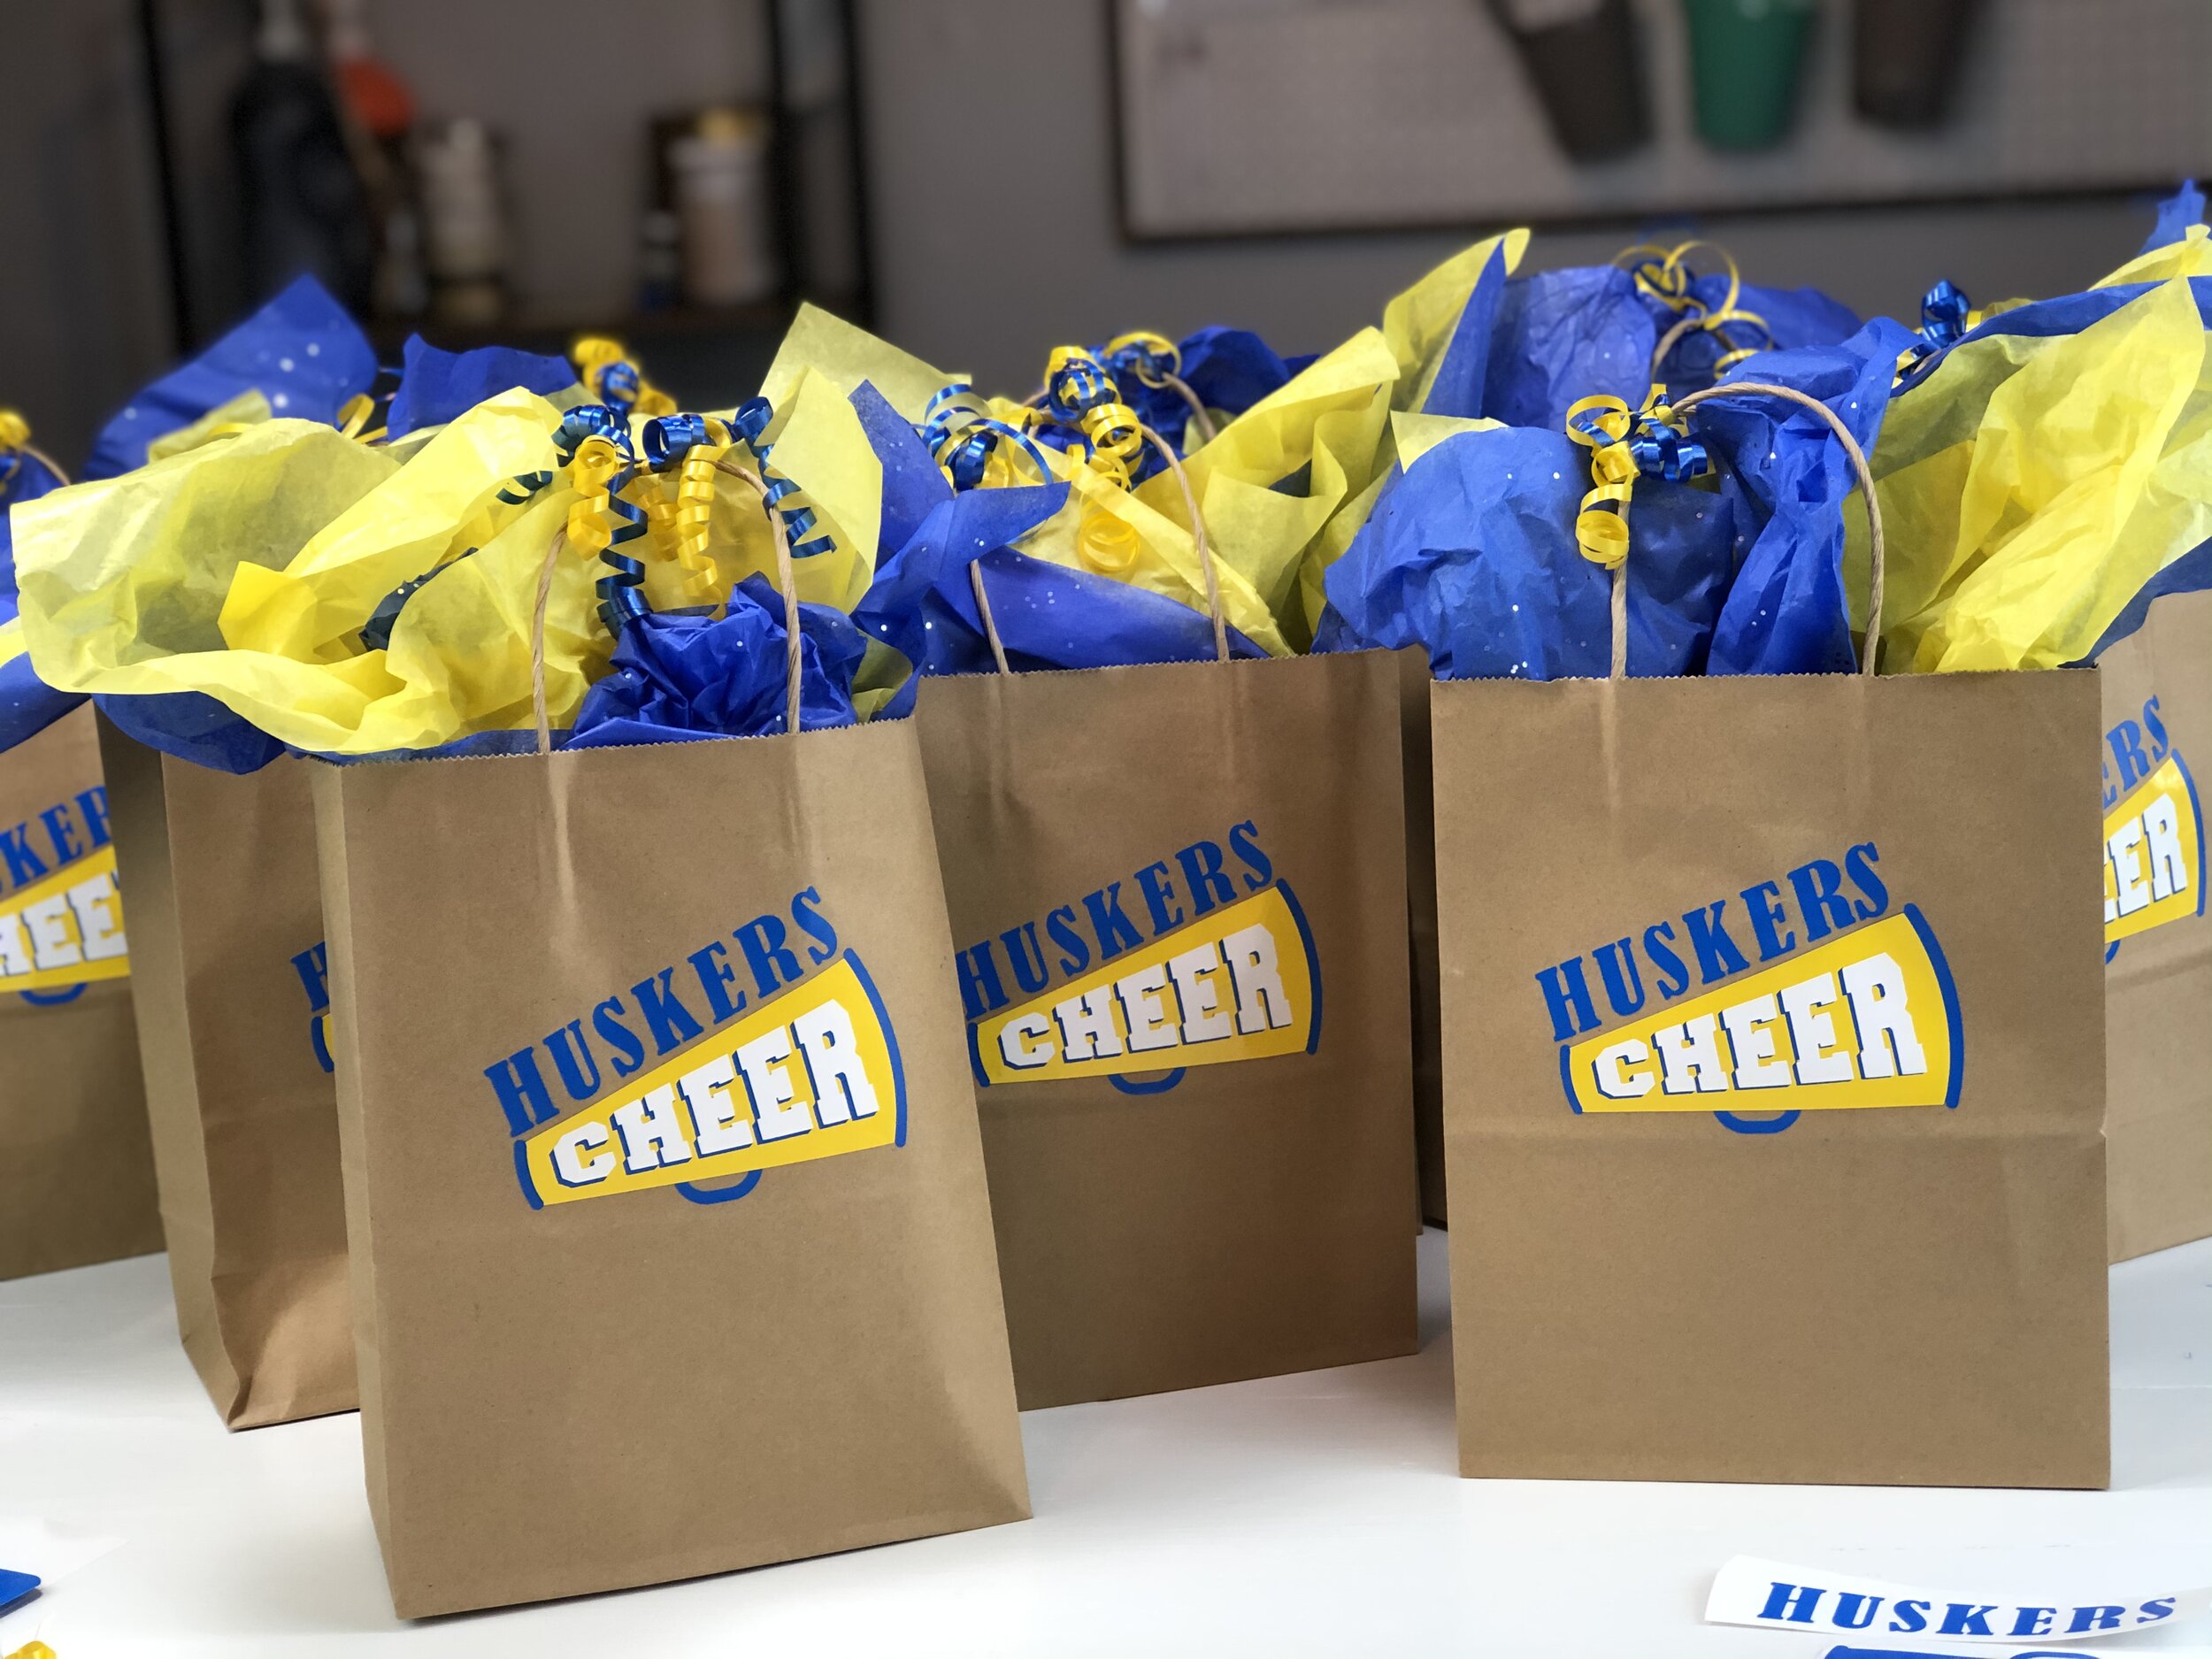 Cheerleader gift bags that are quick, easy, and inexpensive. Put together cute pampered gift bags for cheer appreciation gifts for the end of the season. Use your Cricut to make personalized vinyl decals.